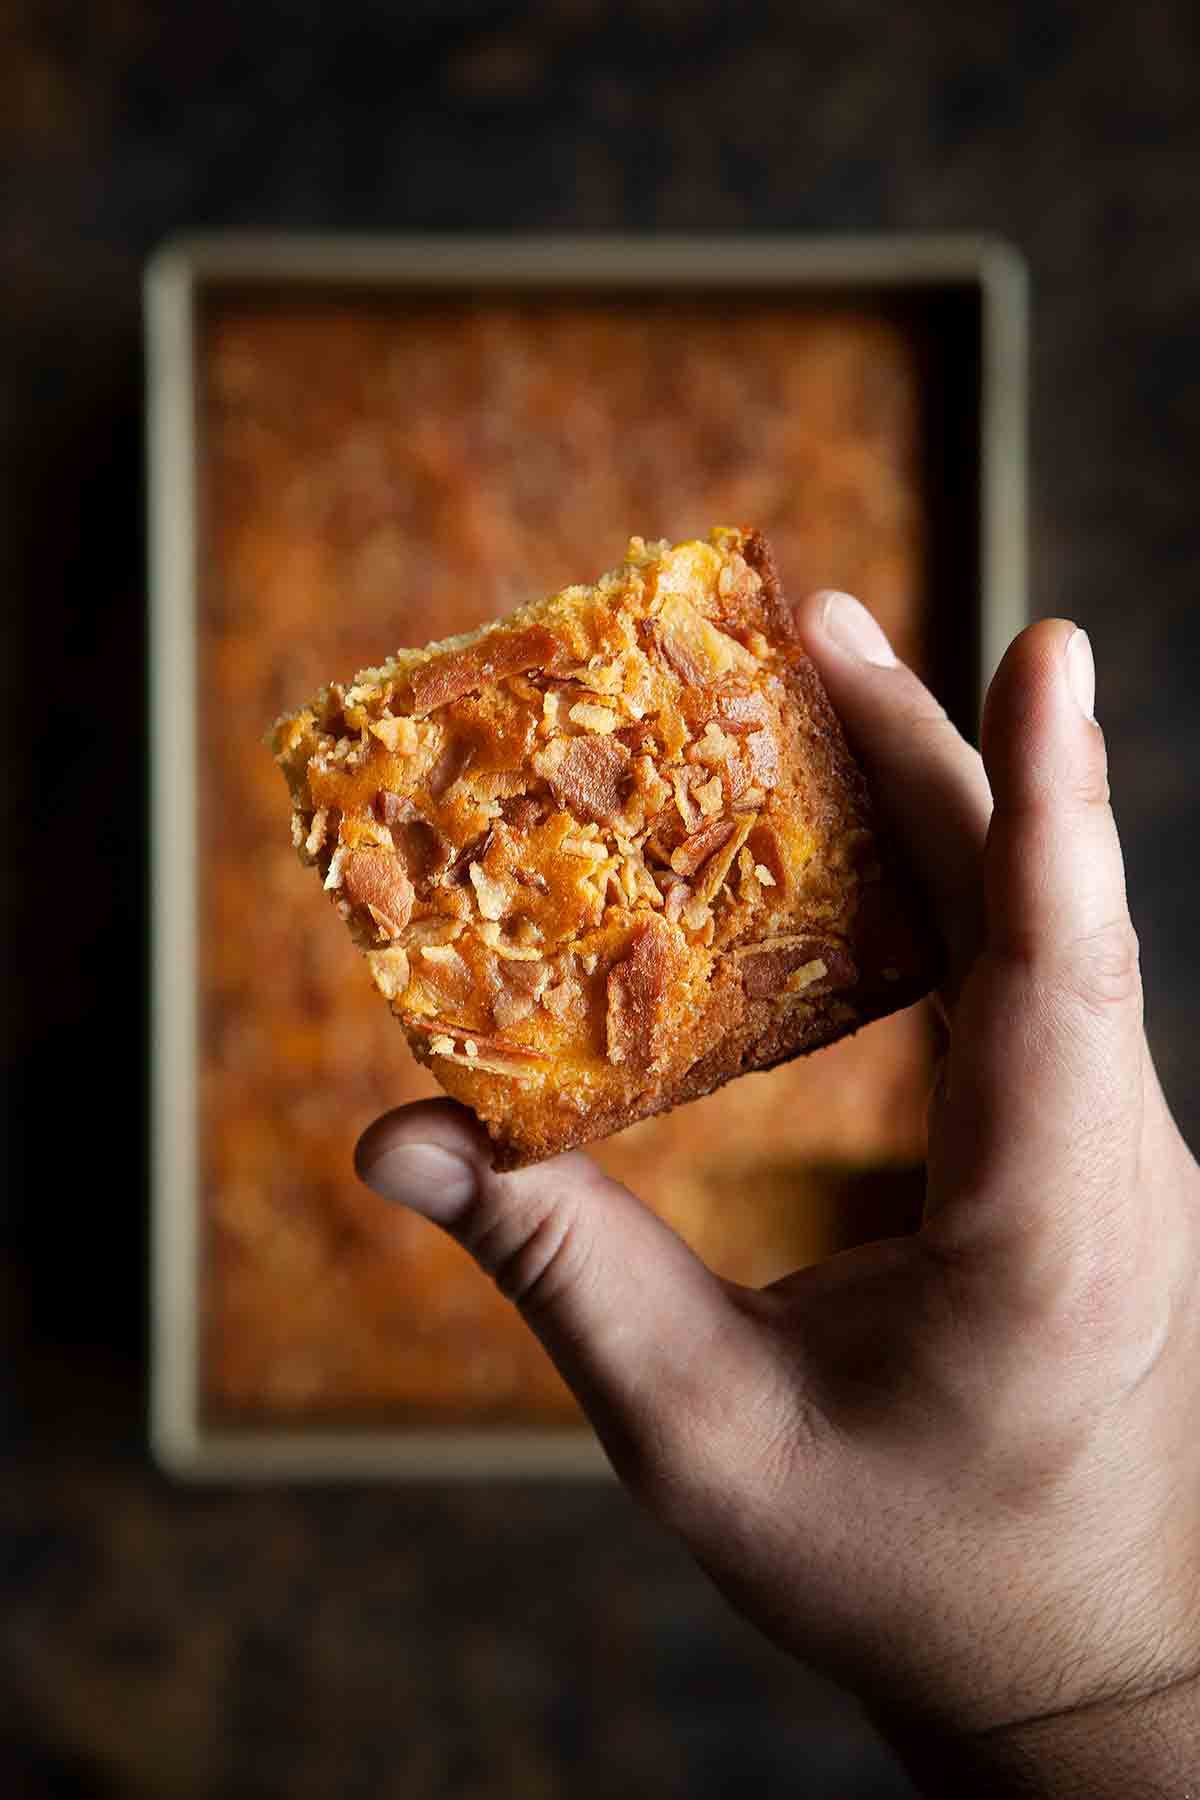 A large rectangular pan with bacon cornbread in the background with a hand holding the corner piece of cornbread.